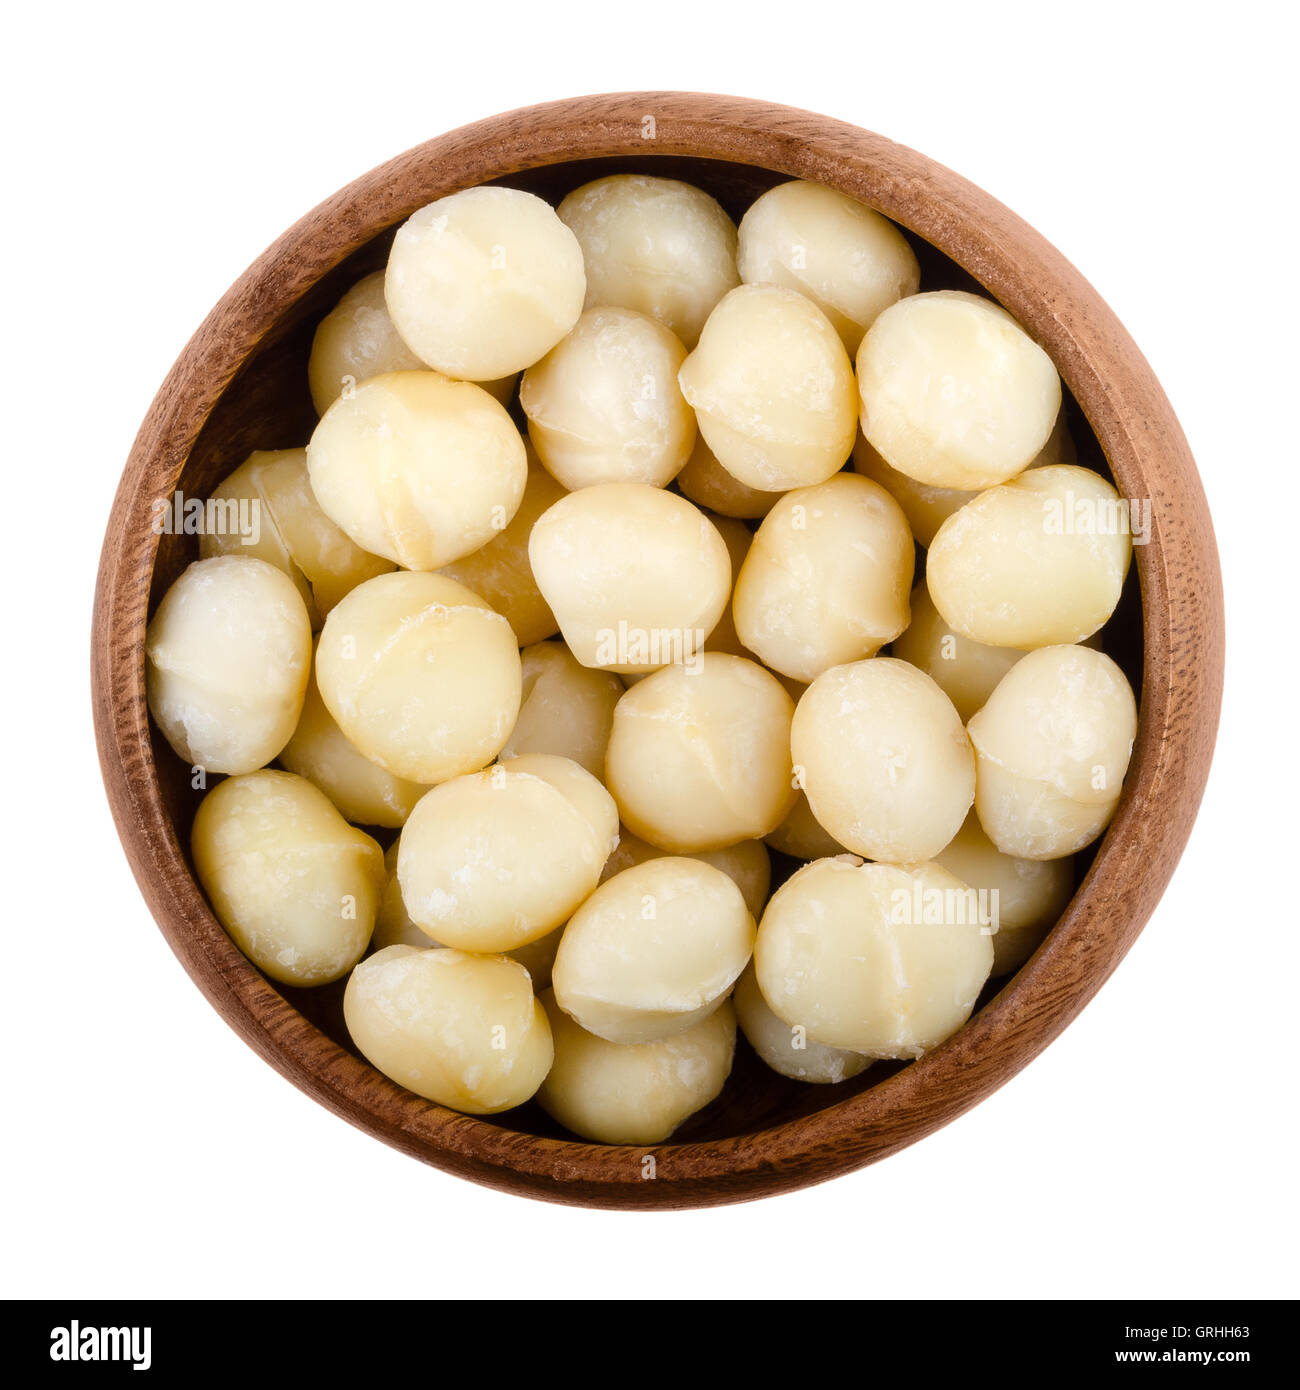 Macadamia nuts in a wooden bowl on white background. Edible seeds without shells. Isolated macro food photo close up from above. Stock Photo